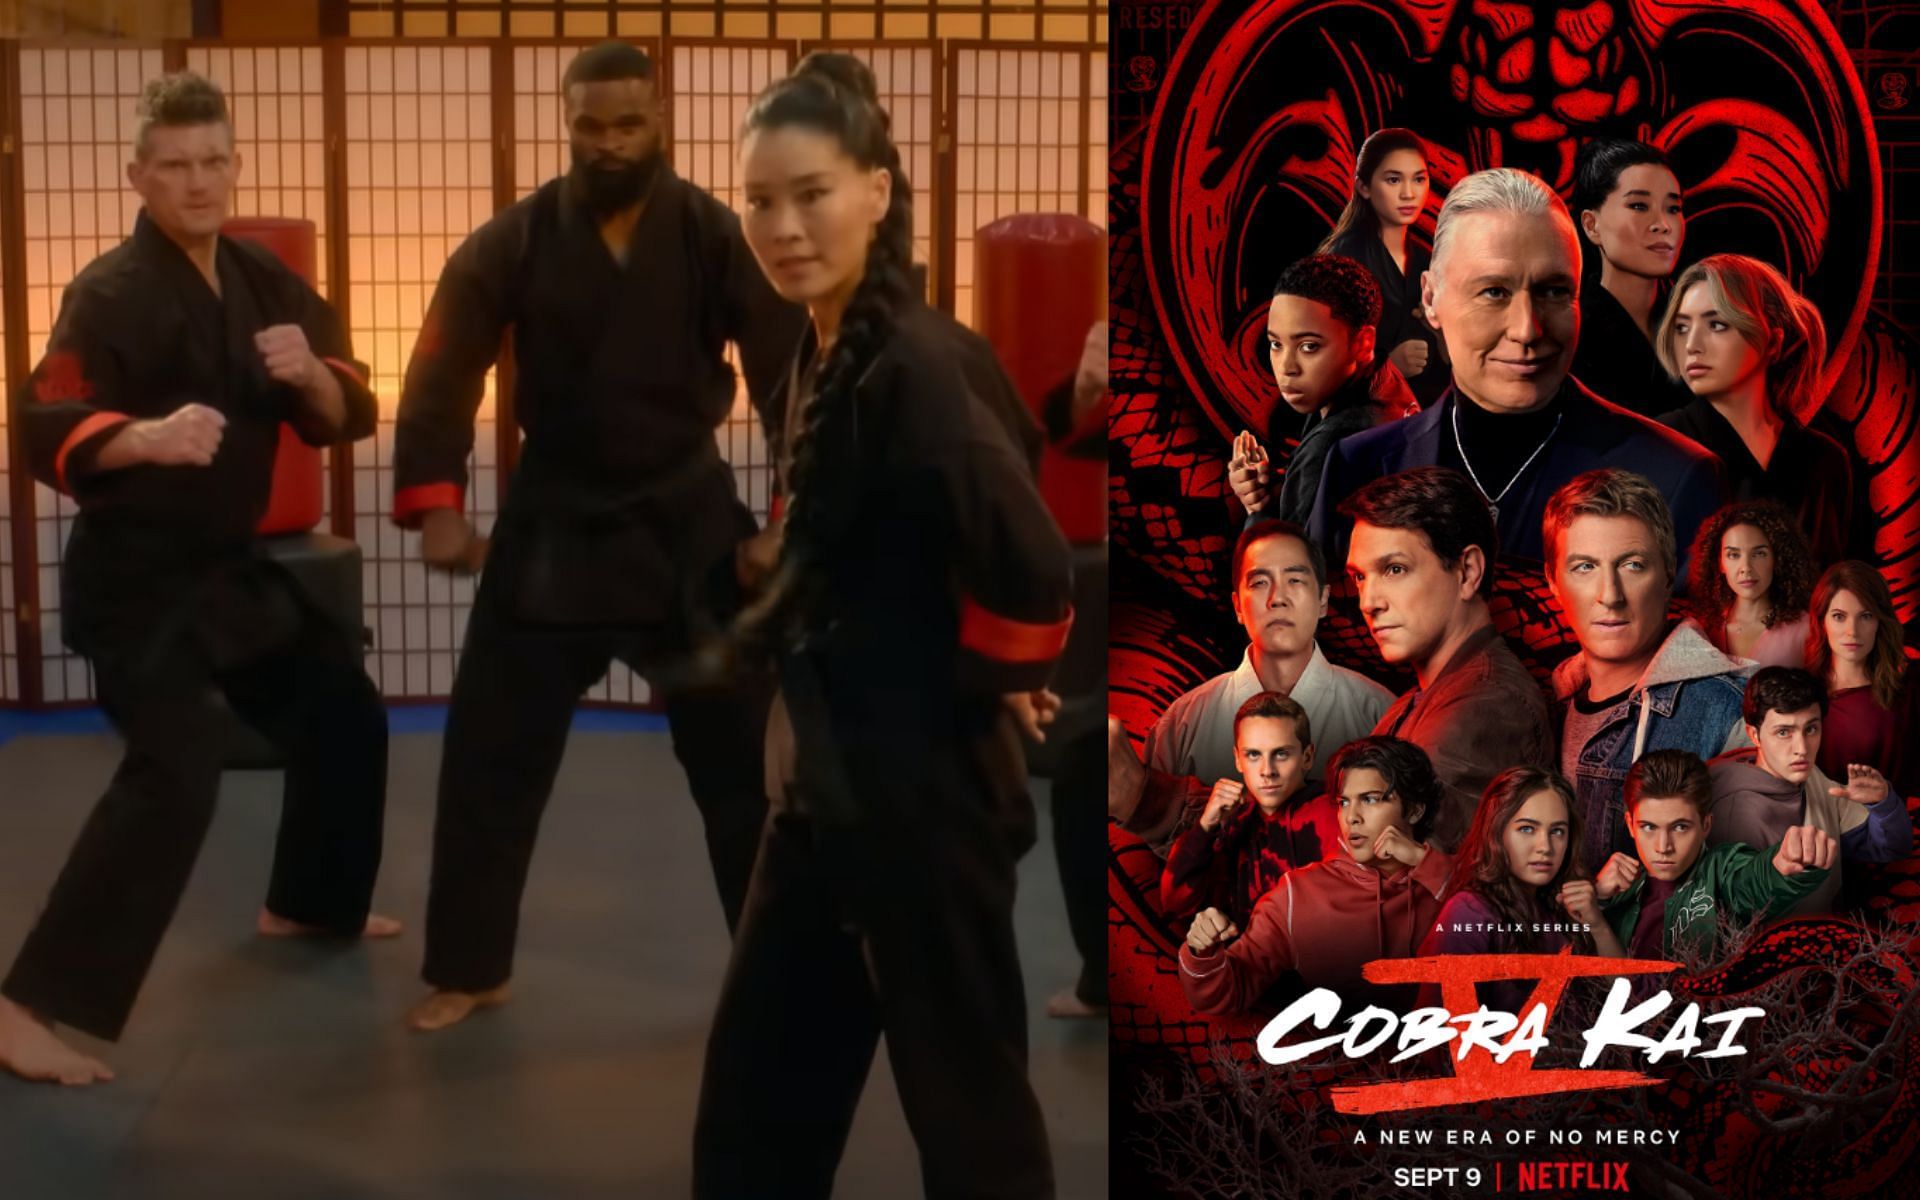 Which UFC fighters star in new season of 'Cobra Kai'?